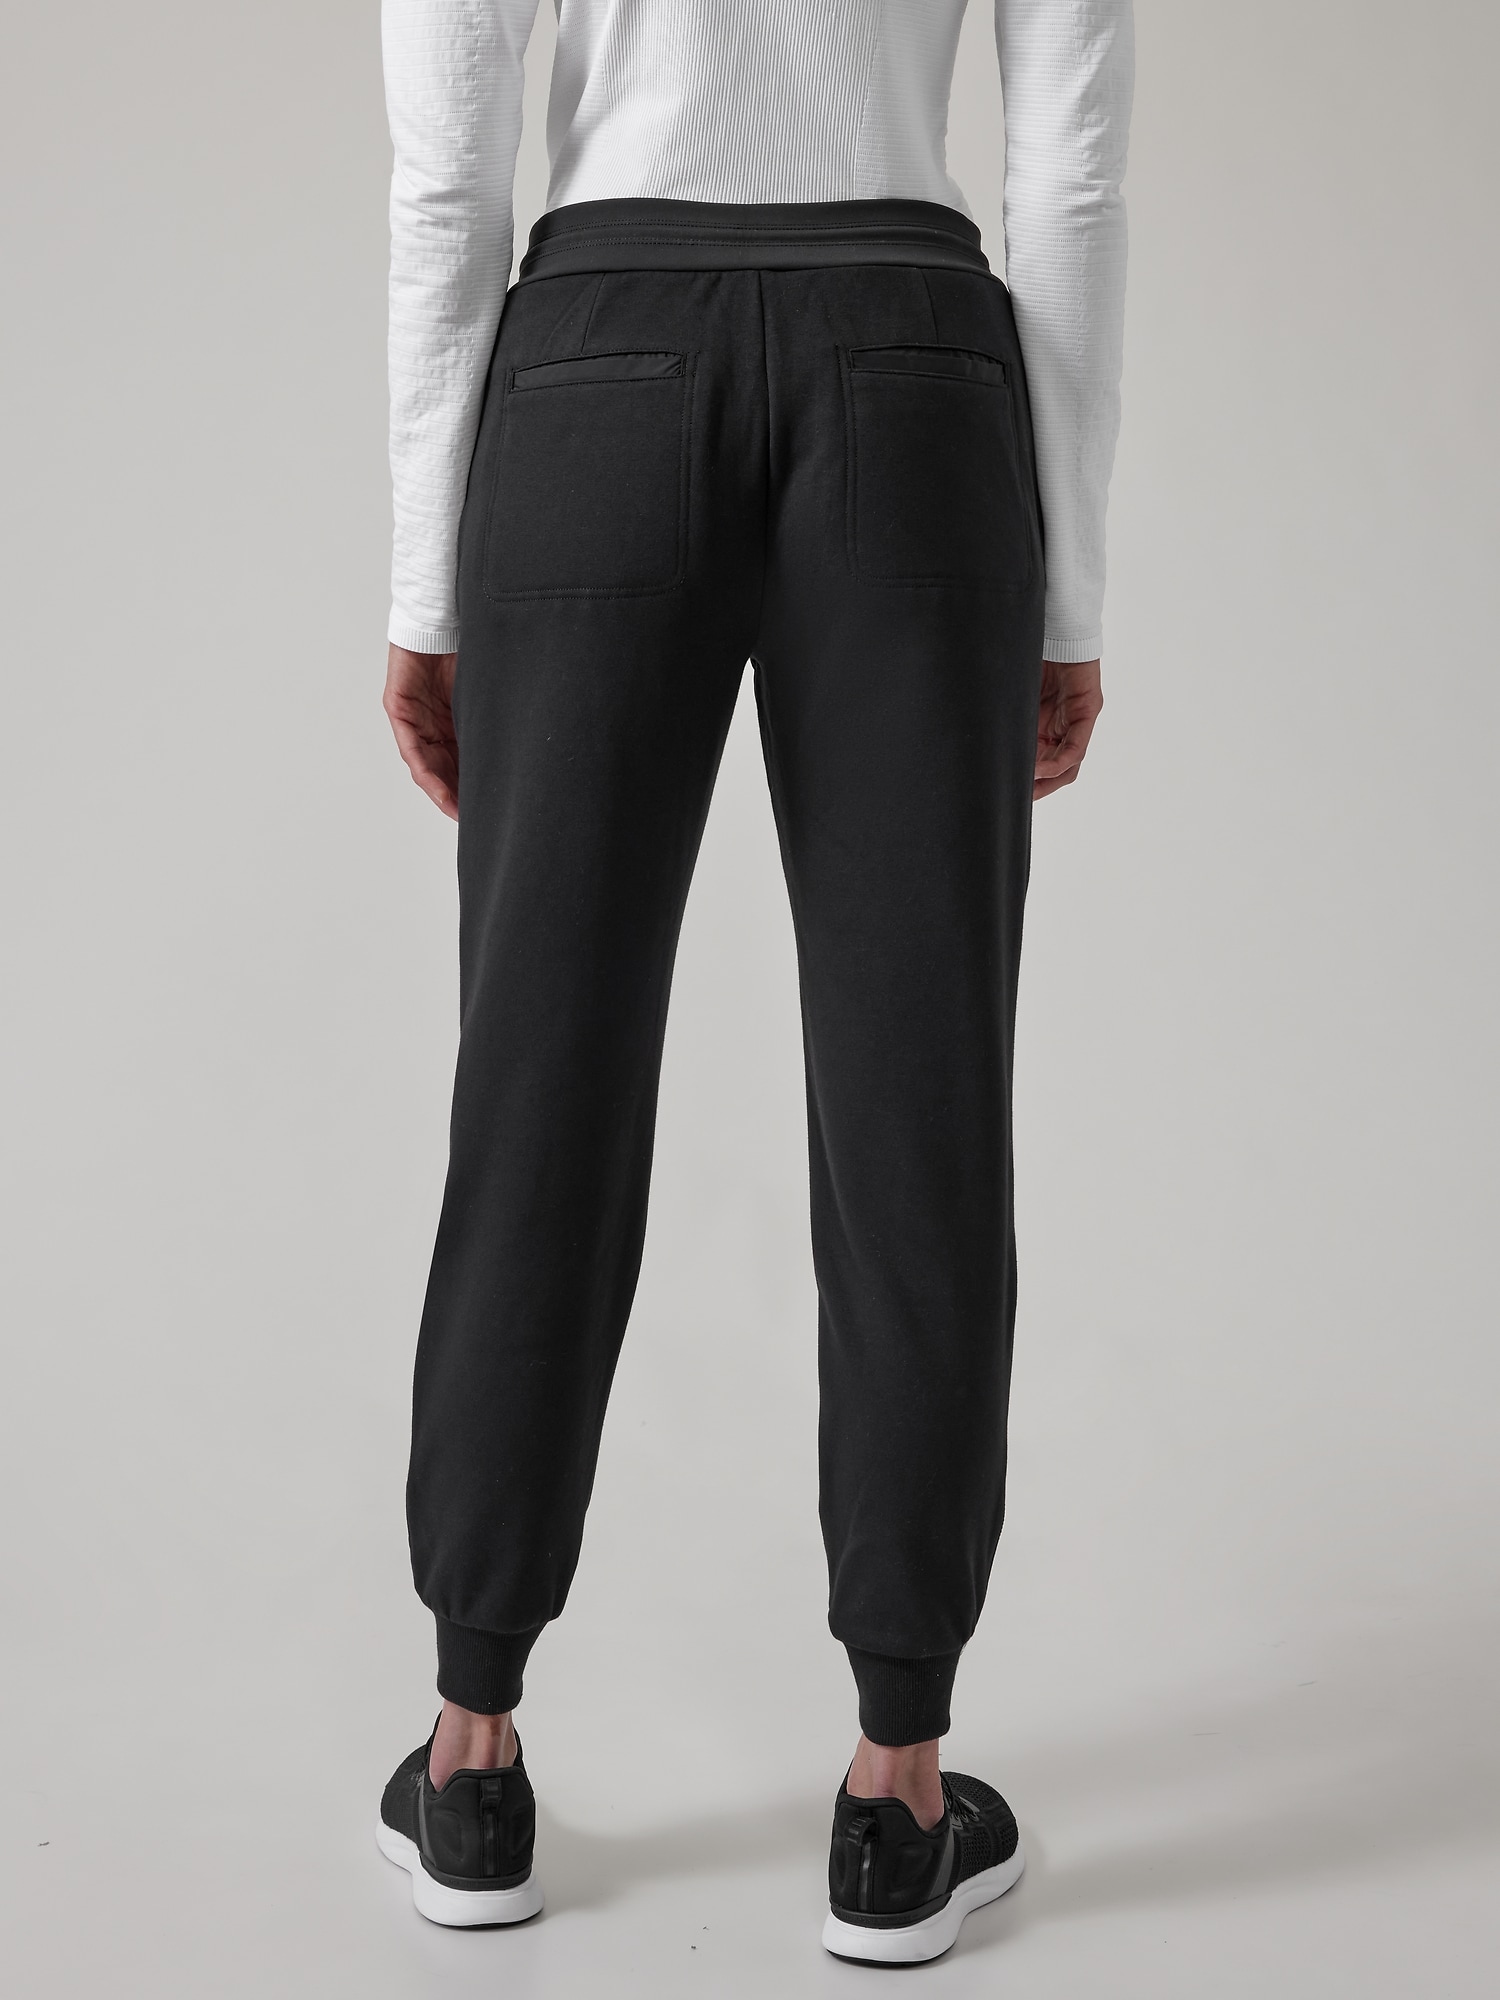 A Quilted Style: Athleta Apres Ski Down Joggers